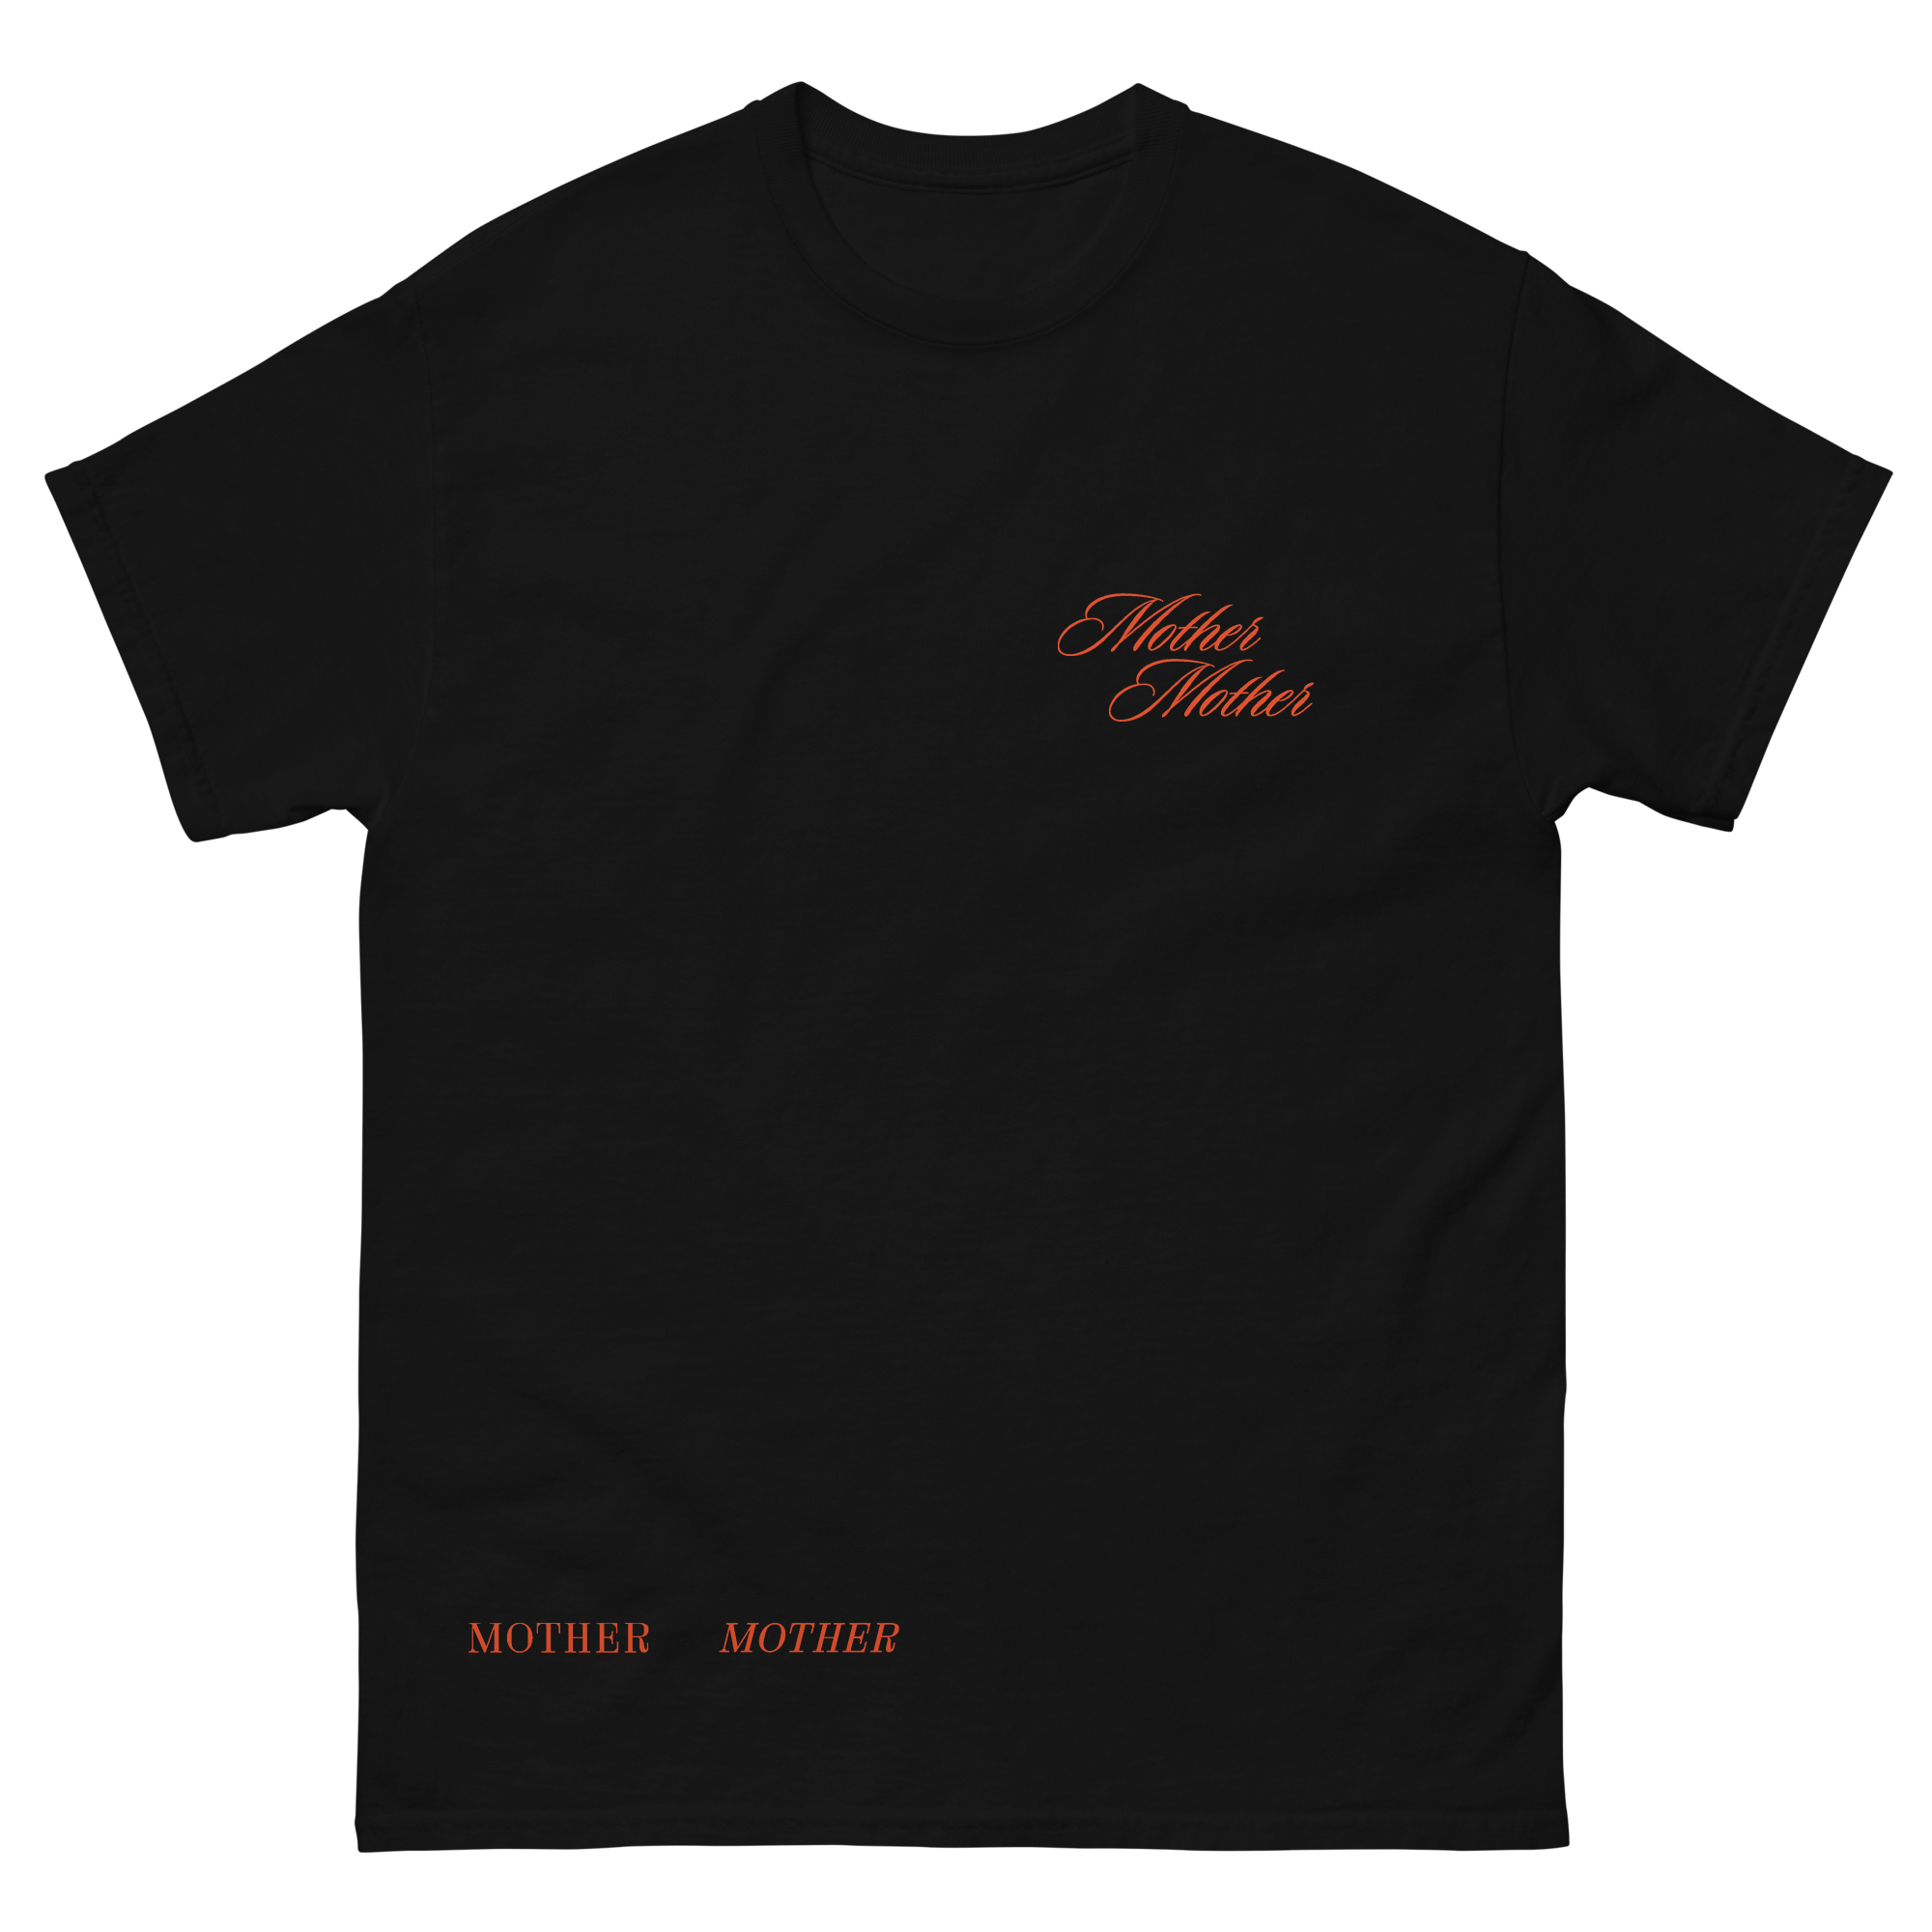 Normalize Tee - Black